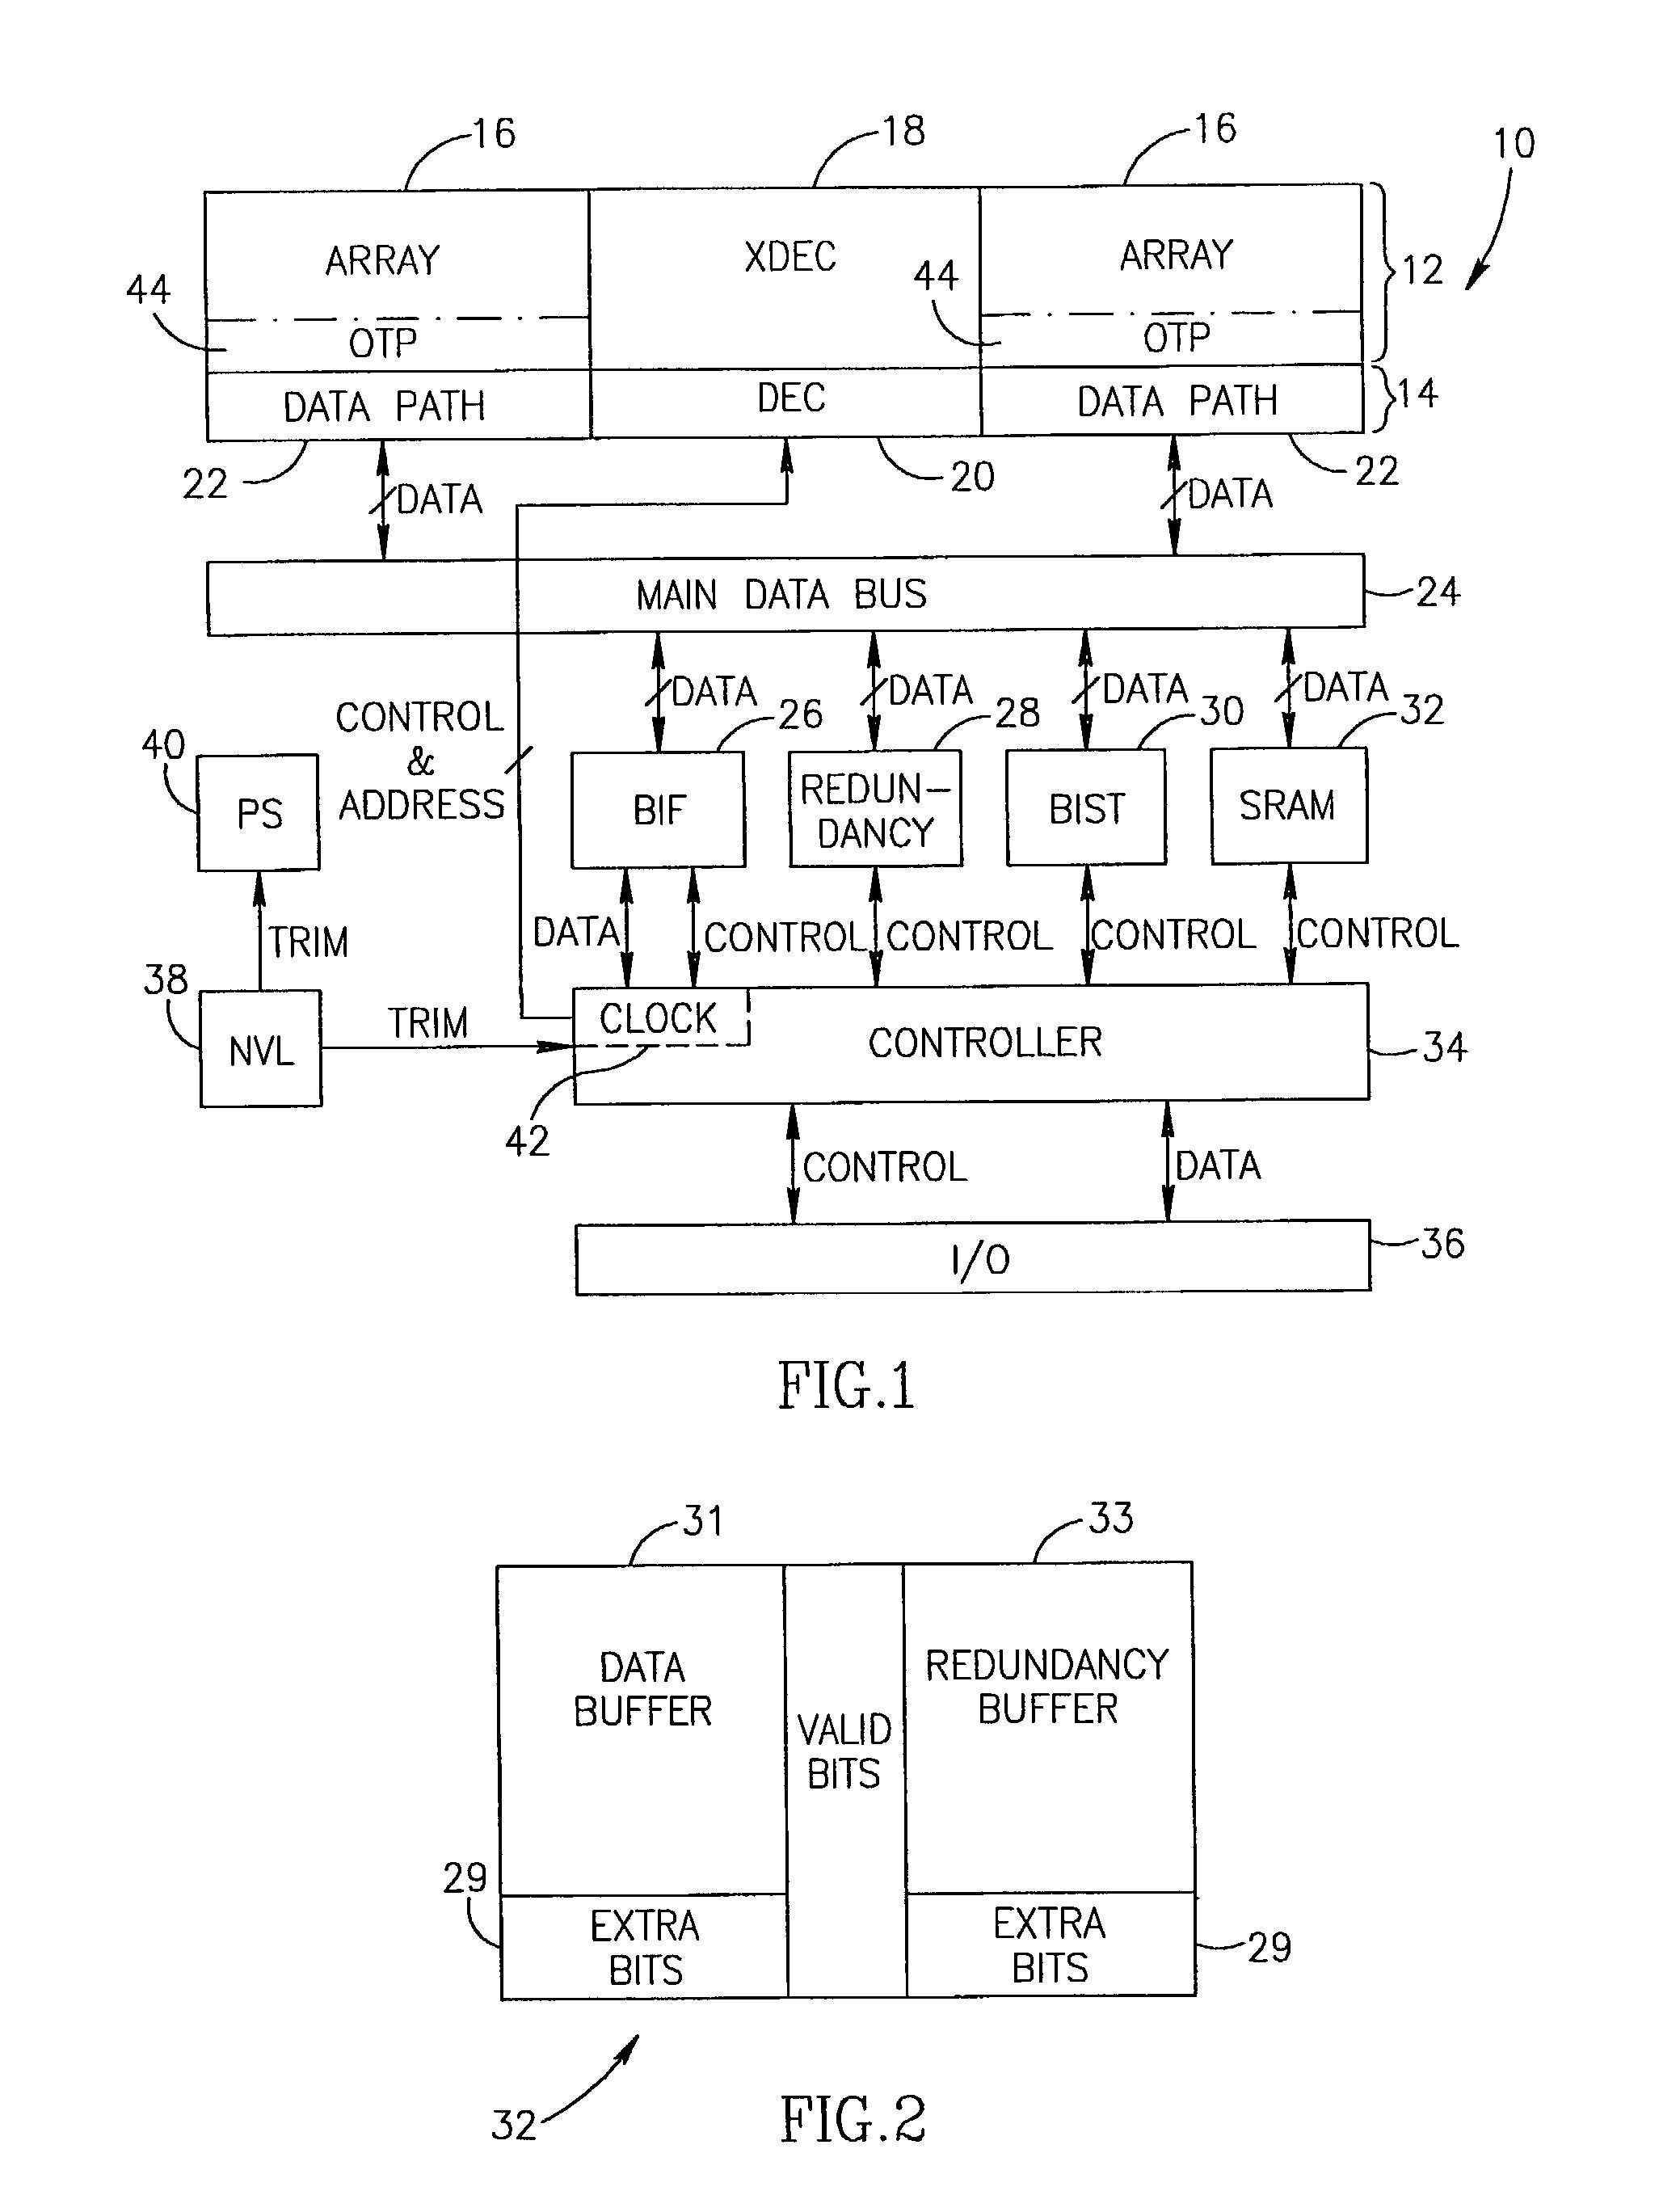 Mass storage device architecture and operation